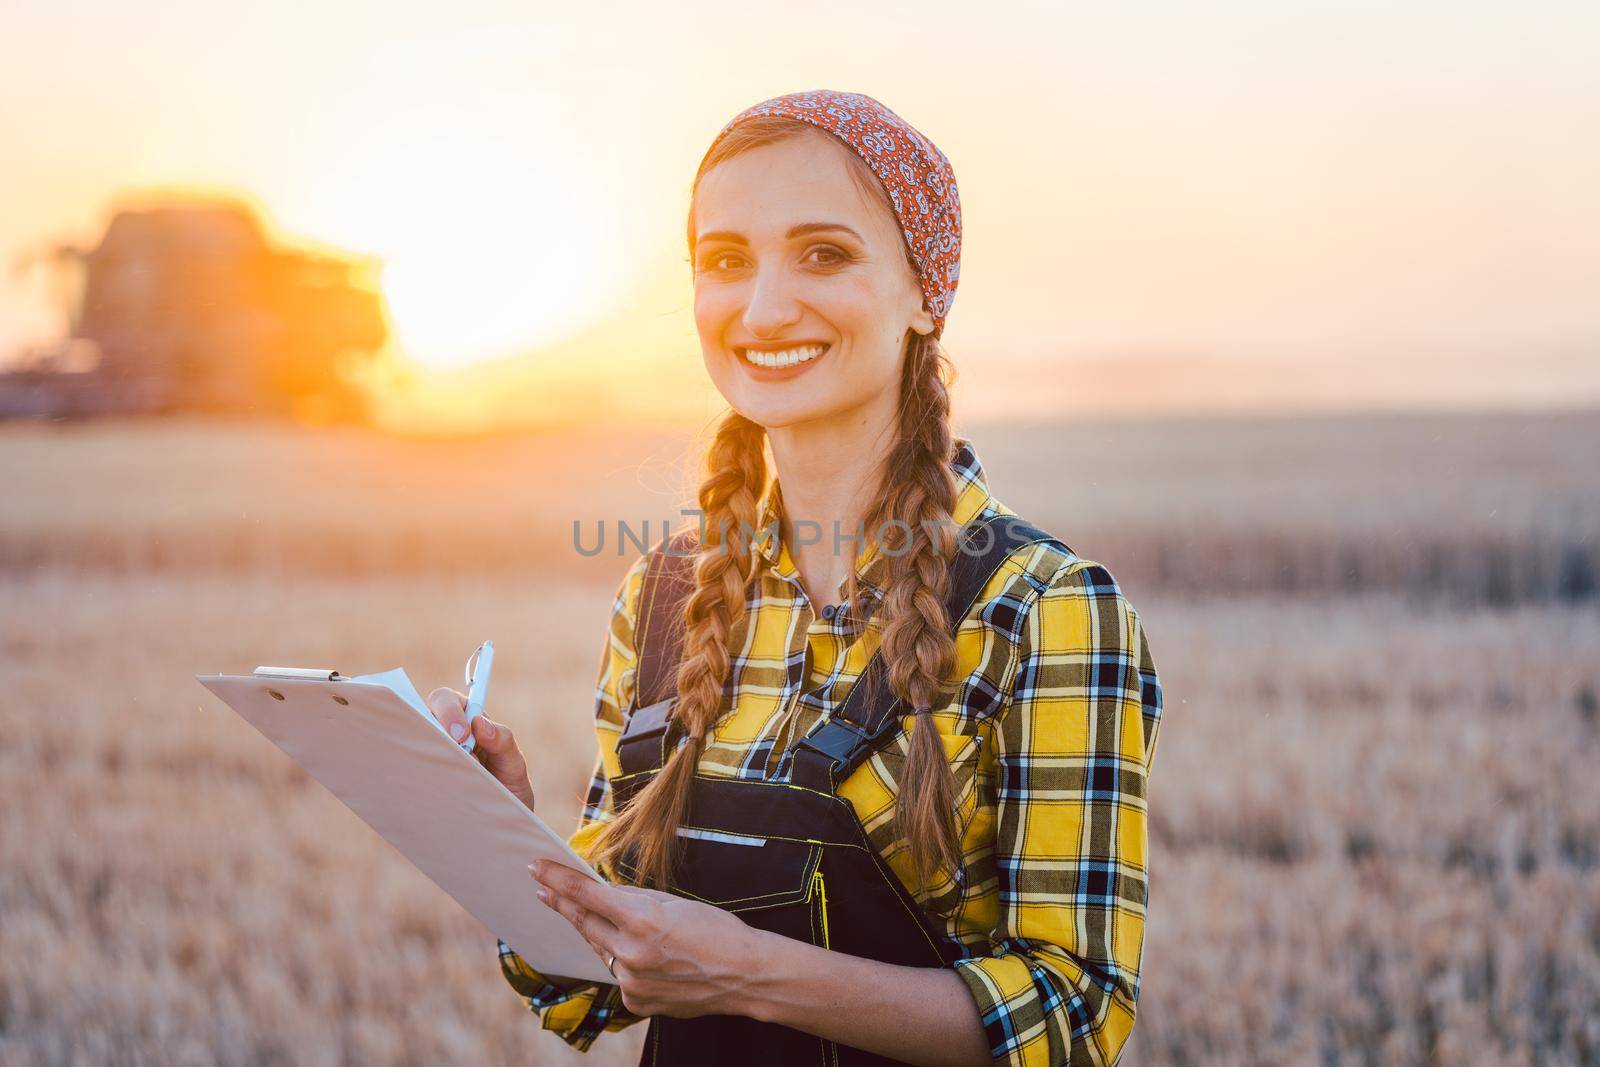 Farmer woman and combine harvester on wheat field during sunset